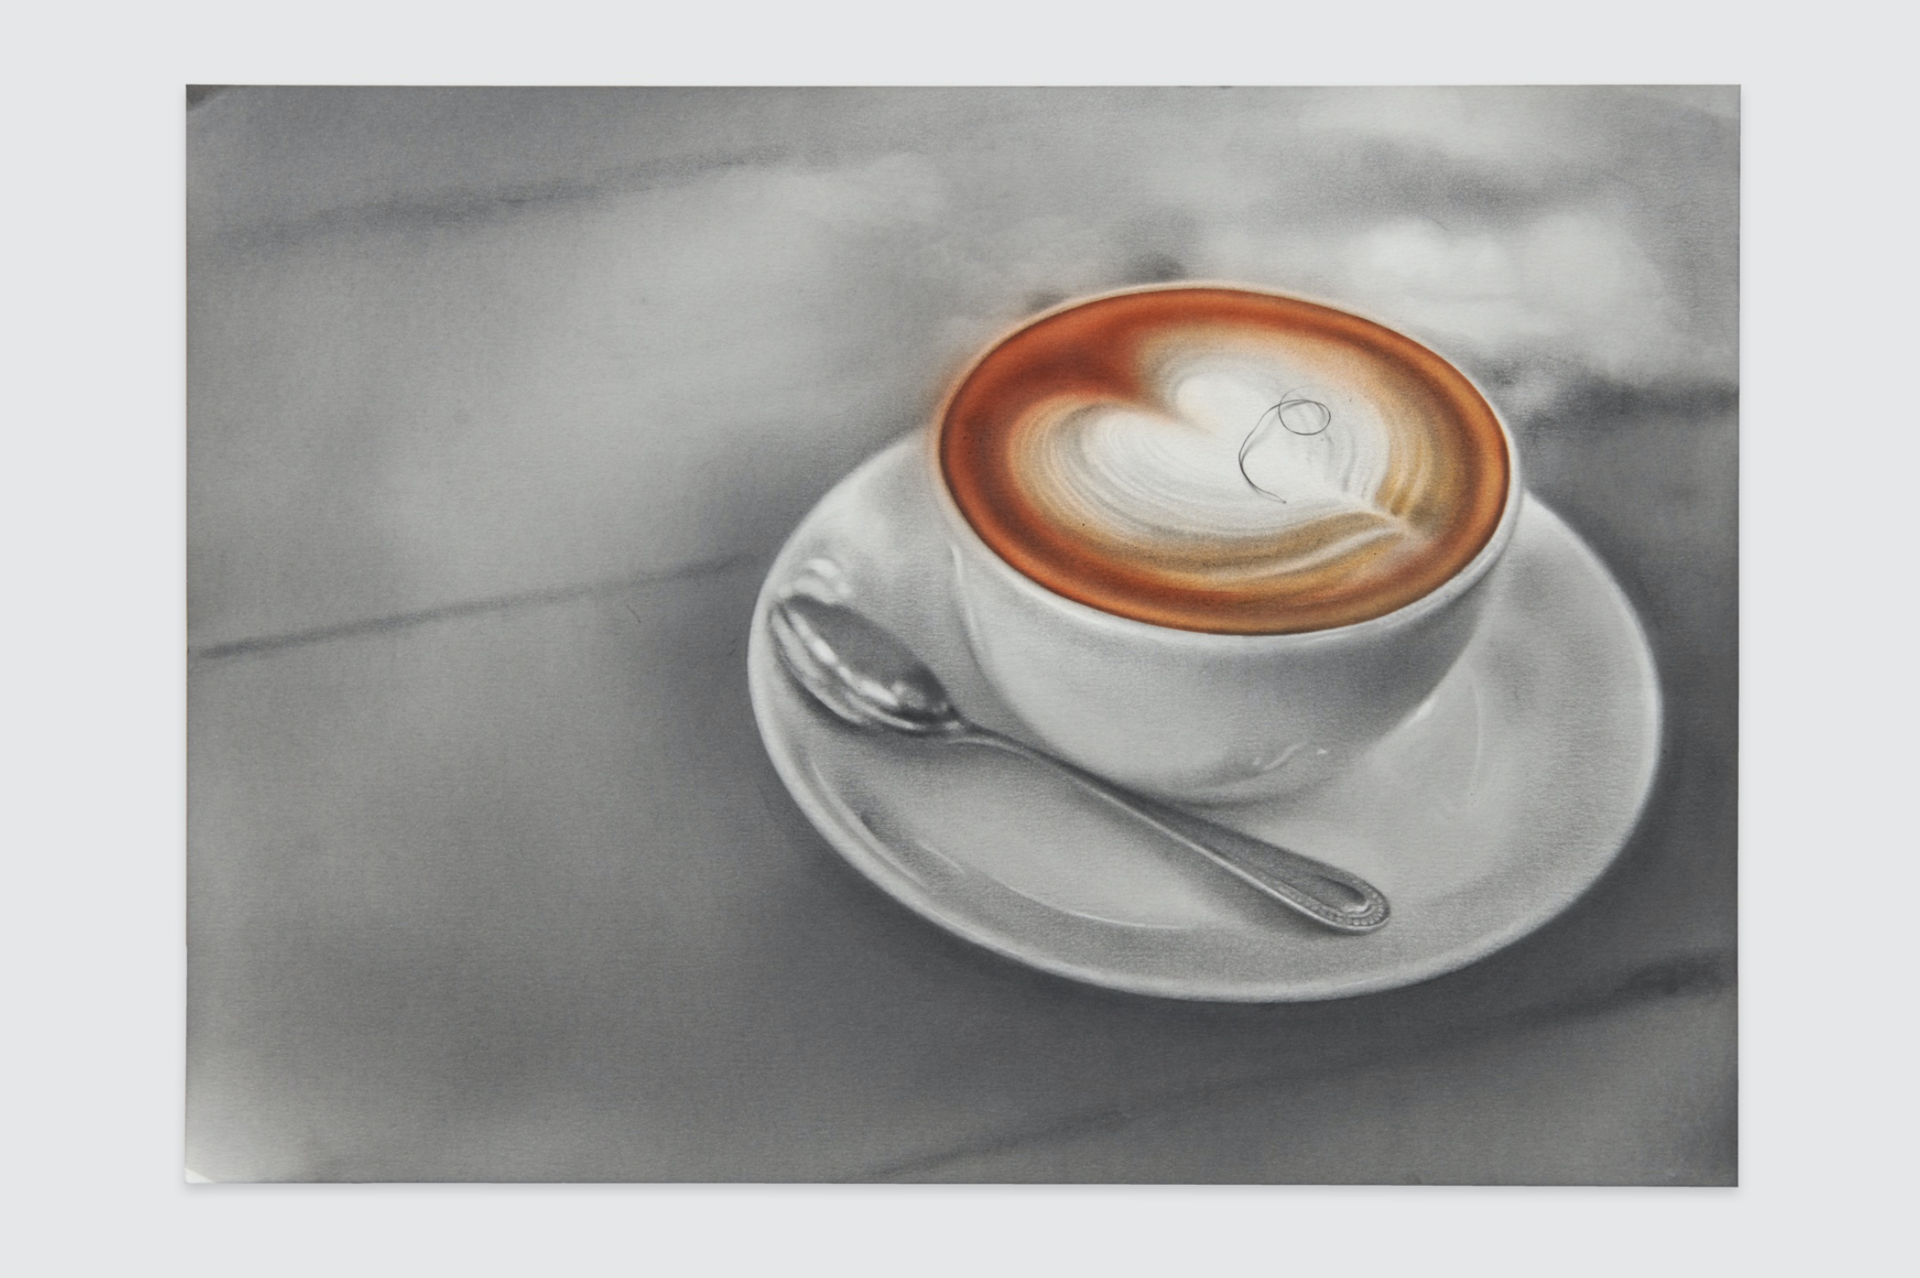 ROBERT MCNALLY  Cappuccino, 2021  graphite/acrylic on paper  29,5 x 42 cm  Courtesy KOENIG2 by_ robbygreif, Vienna and the artist